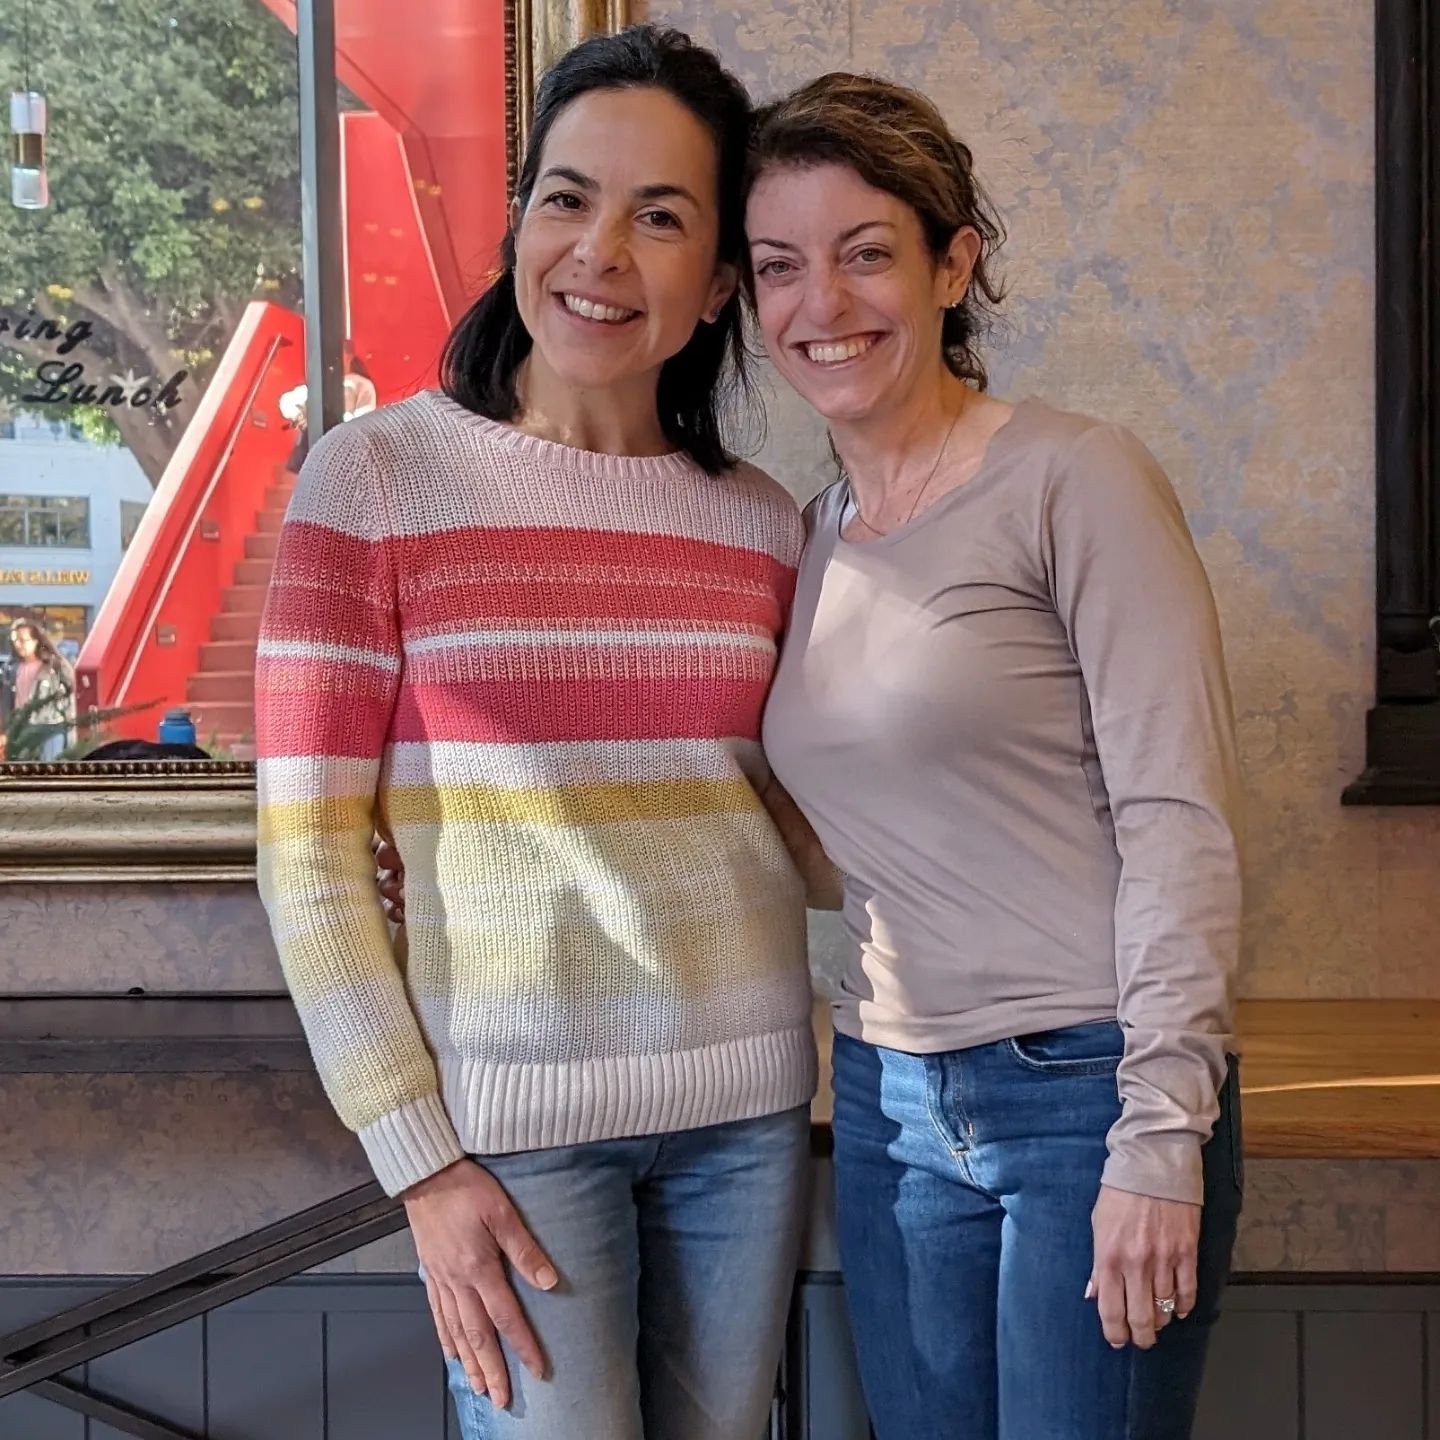 April has been all about #teamwork. After months of planning and strategizing, @rebekahrotstein and I have collaborated and launched a new @gotbuffbones coaching program for midlife women confronting osteoporosis to guide them through matters of bone